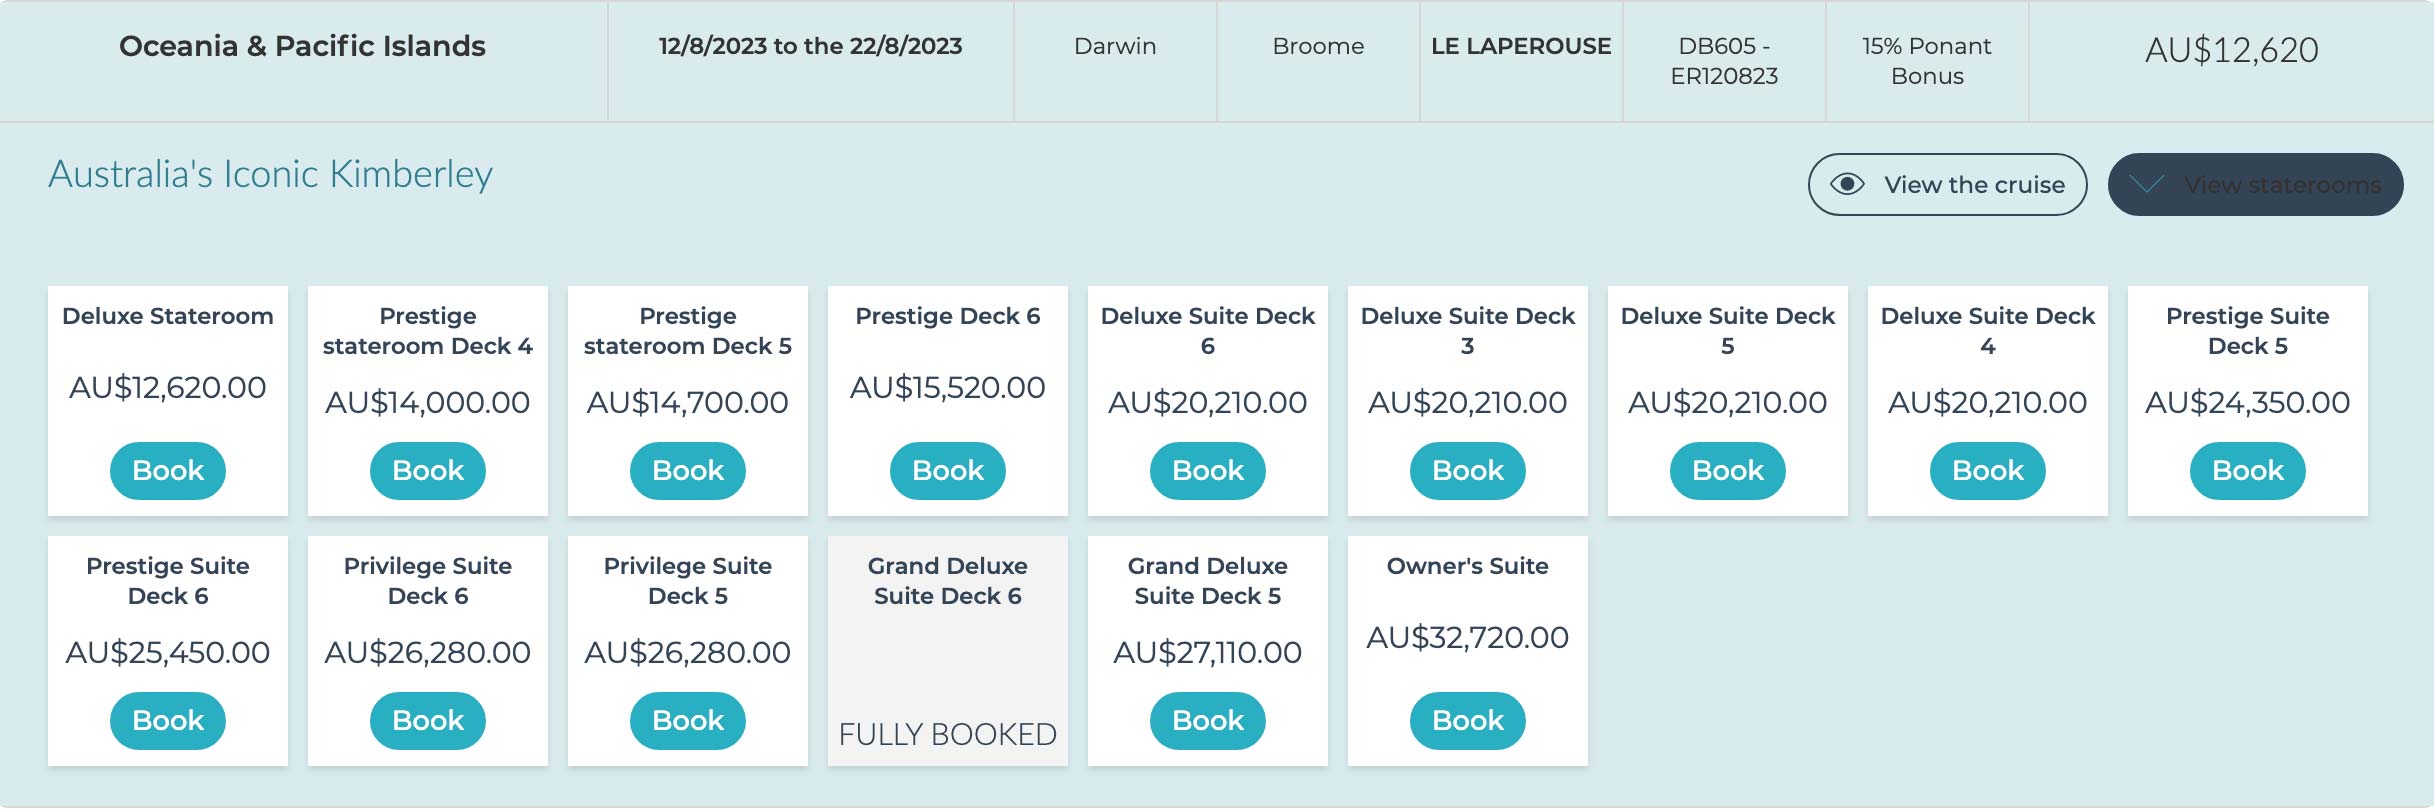 LE-LAPEROUSE-12-to-22-AUG-2023-prices